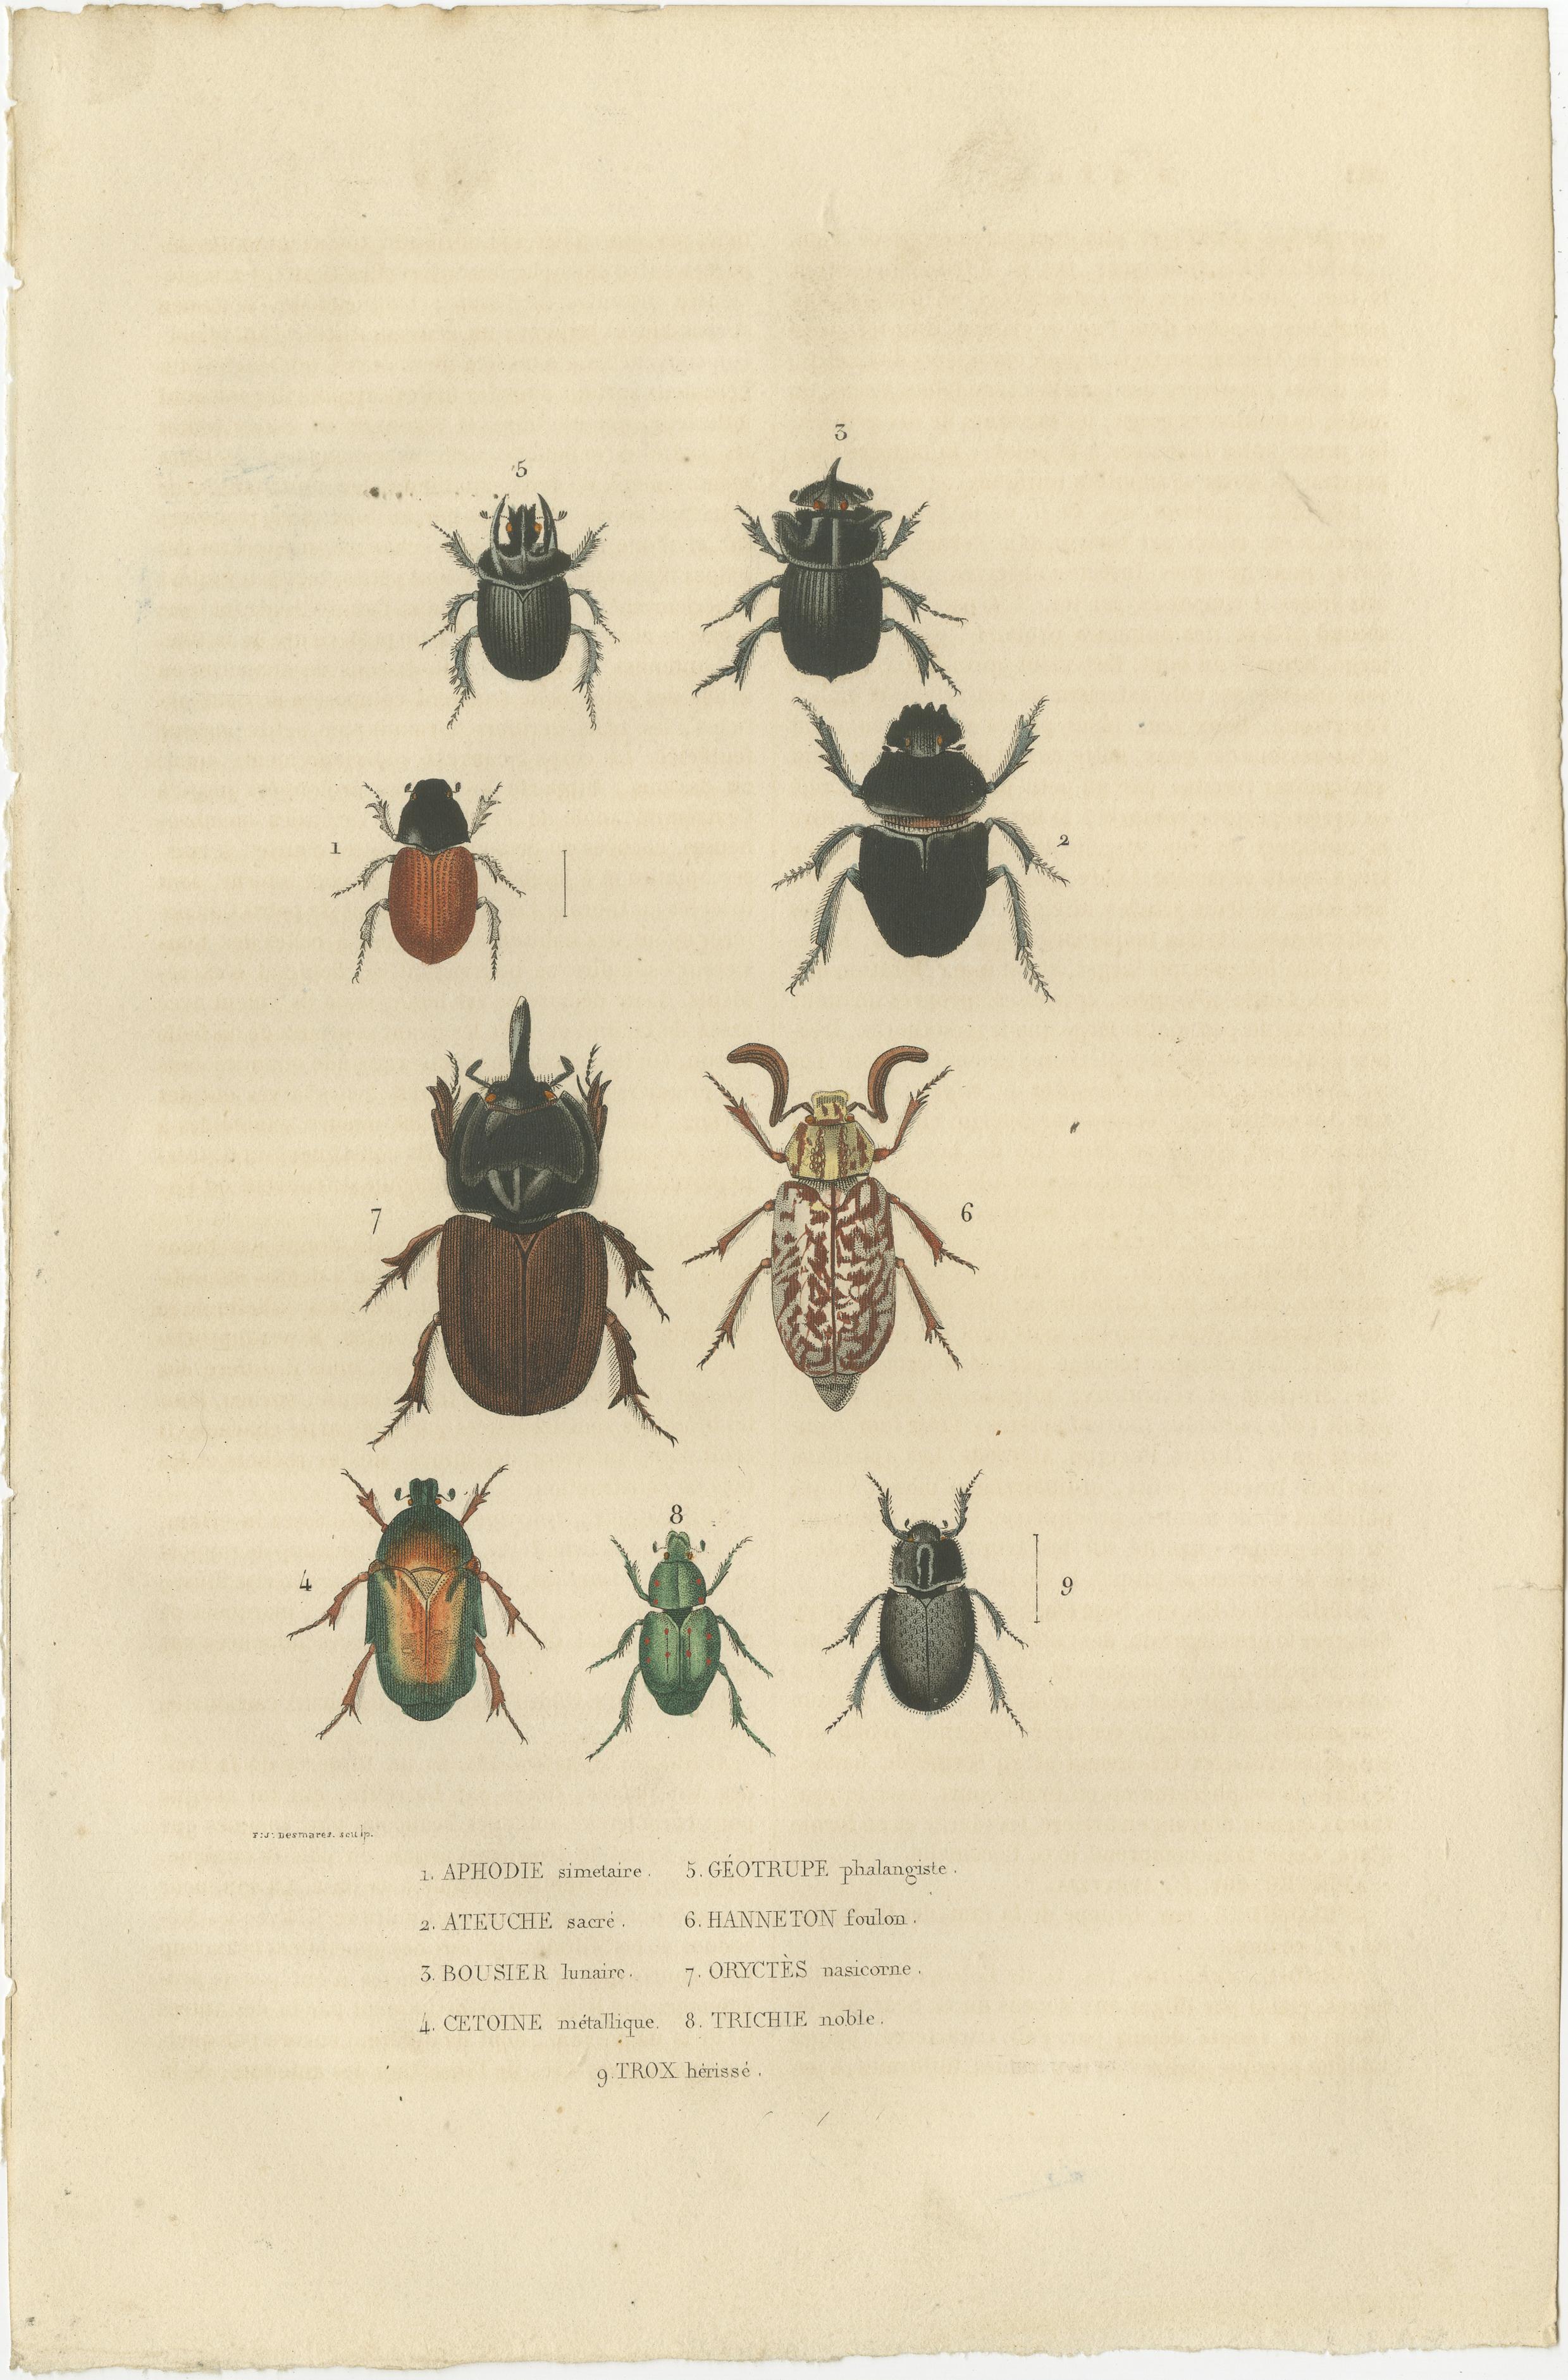 The images are finely detailed engravings of beetles from a 19th-century scientific collection. Each beetle is rendered with precision, showcasing their unique physical characteristics, such as the segmentation of their bodies, the texture of their